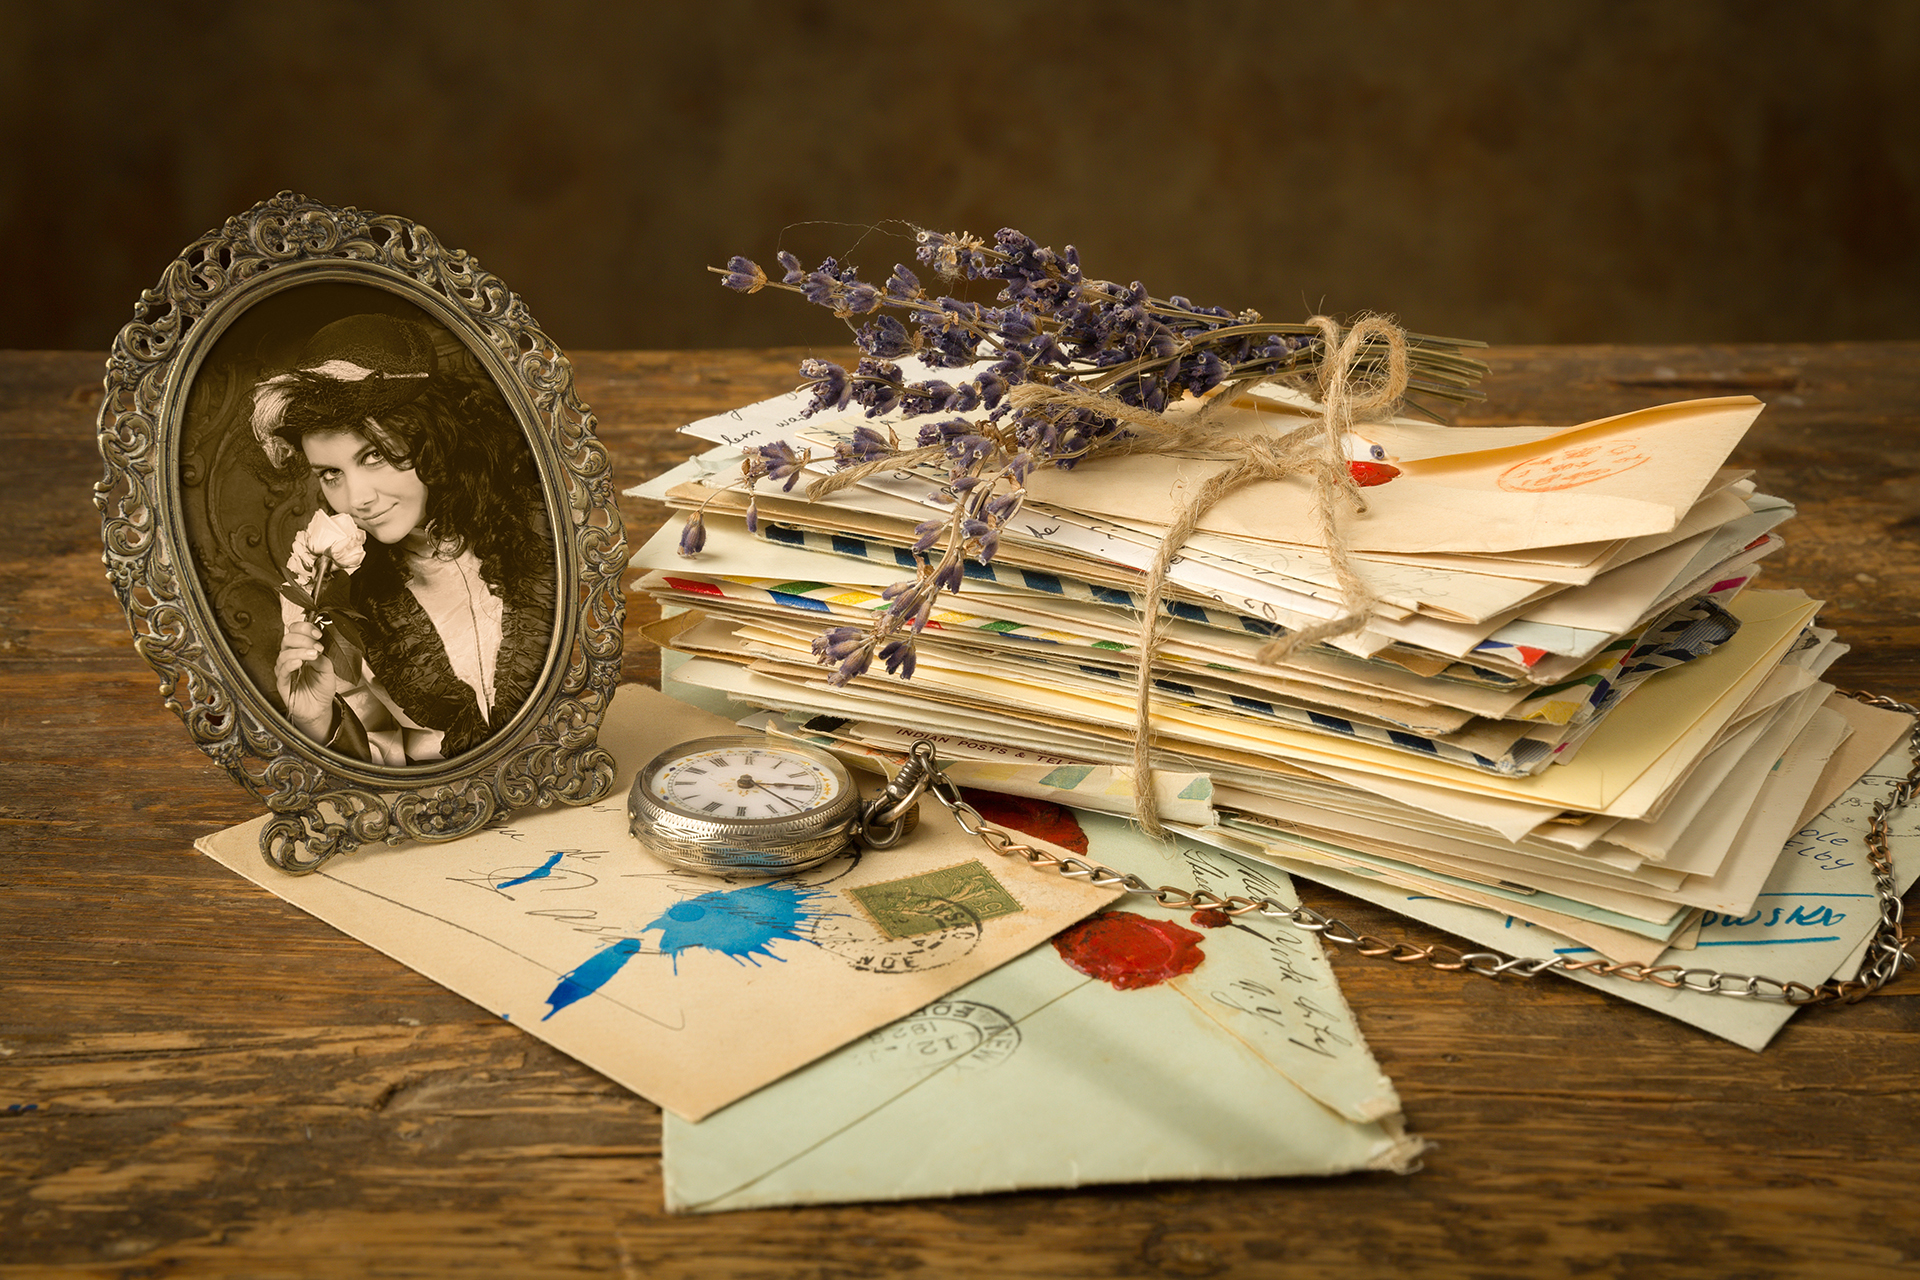 A collection of letters, old photos, and other artifacts, which together help to enrich a family history